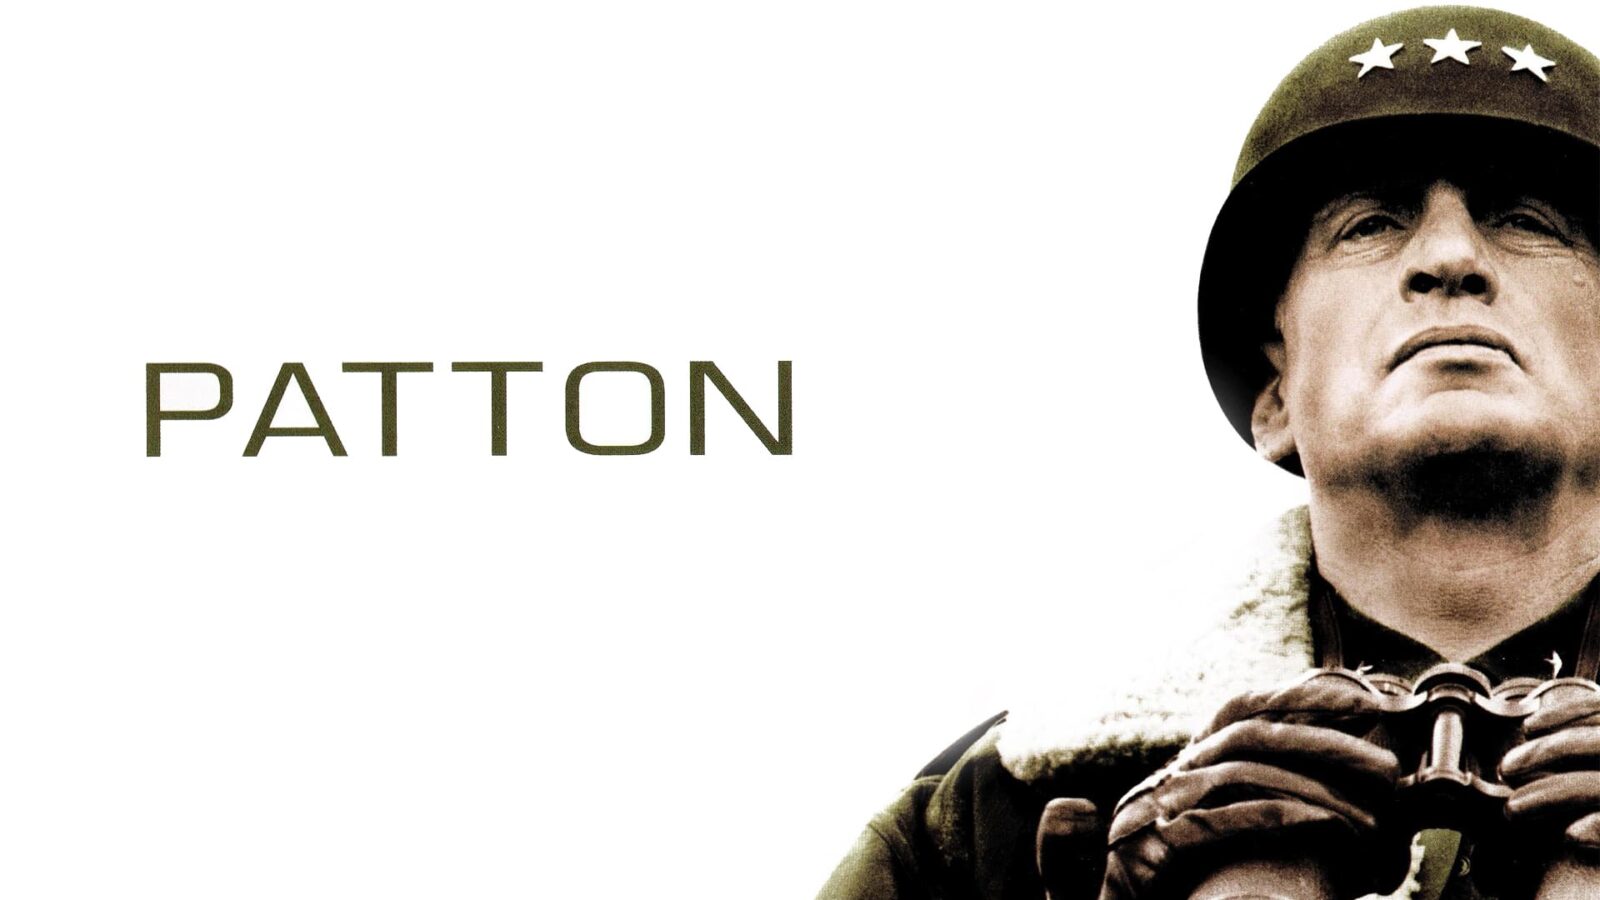 Image from the movie "Patton"